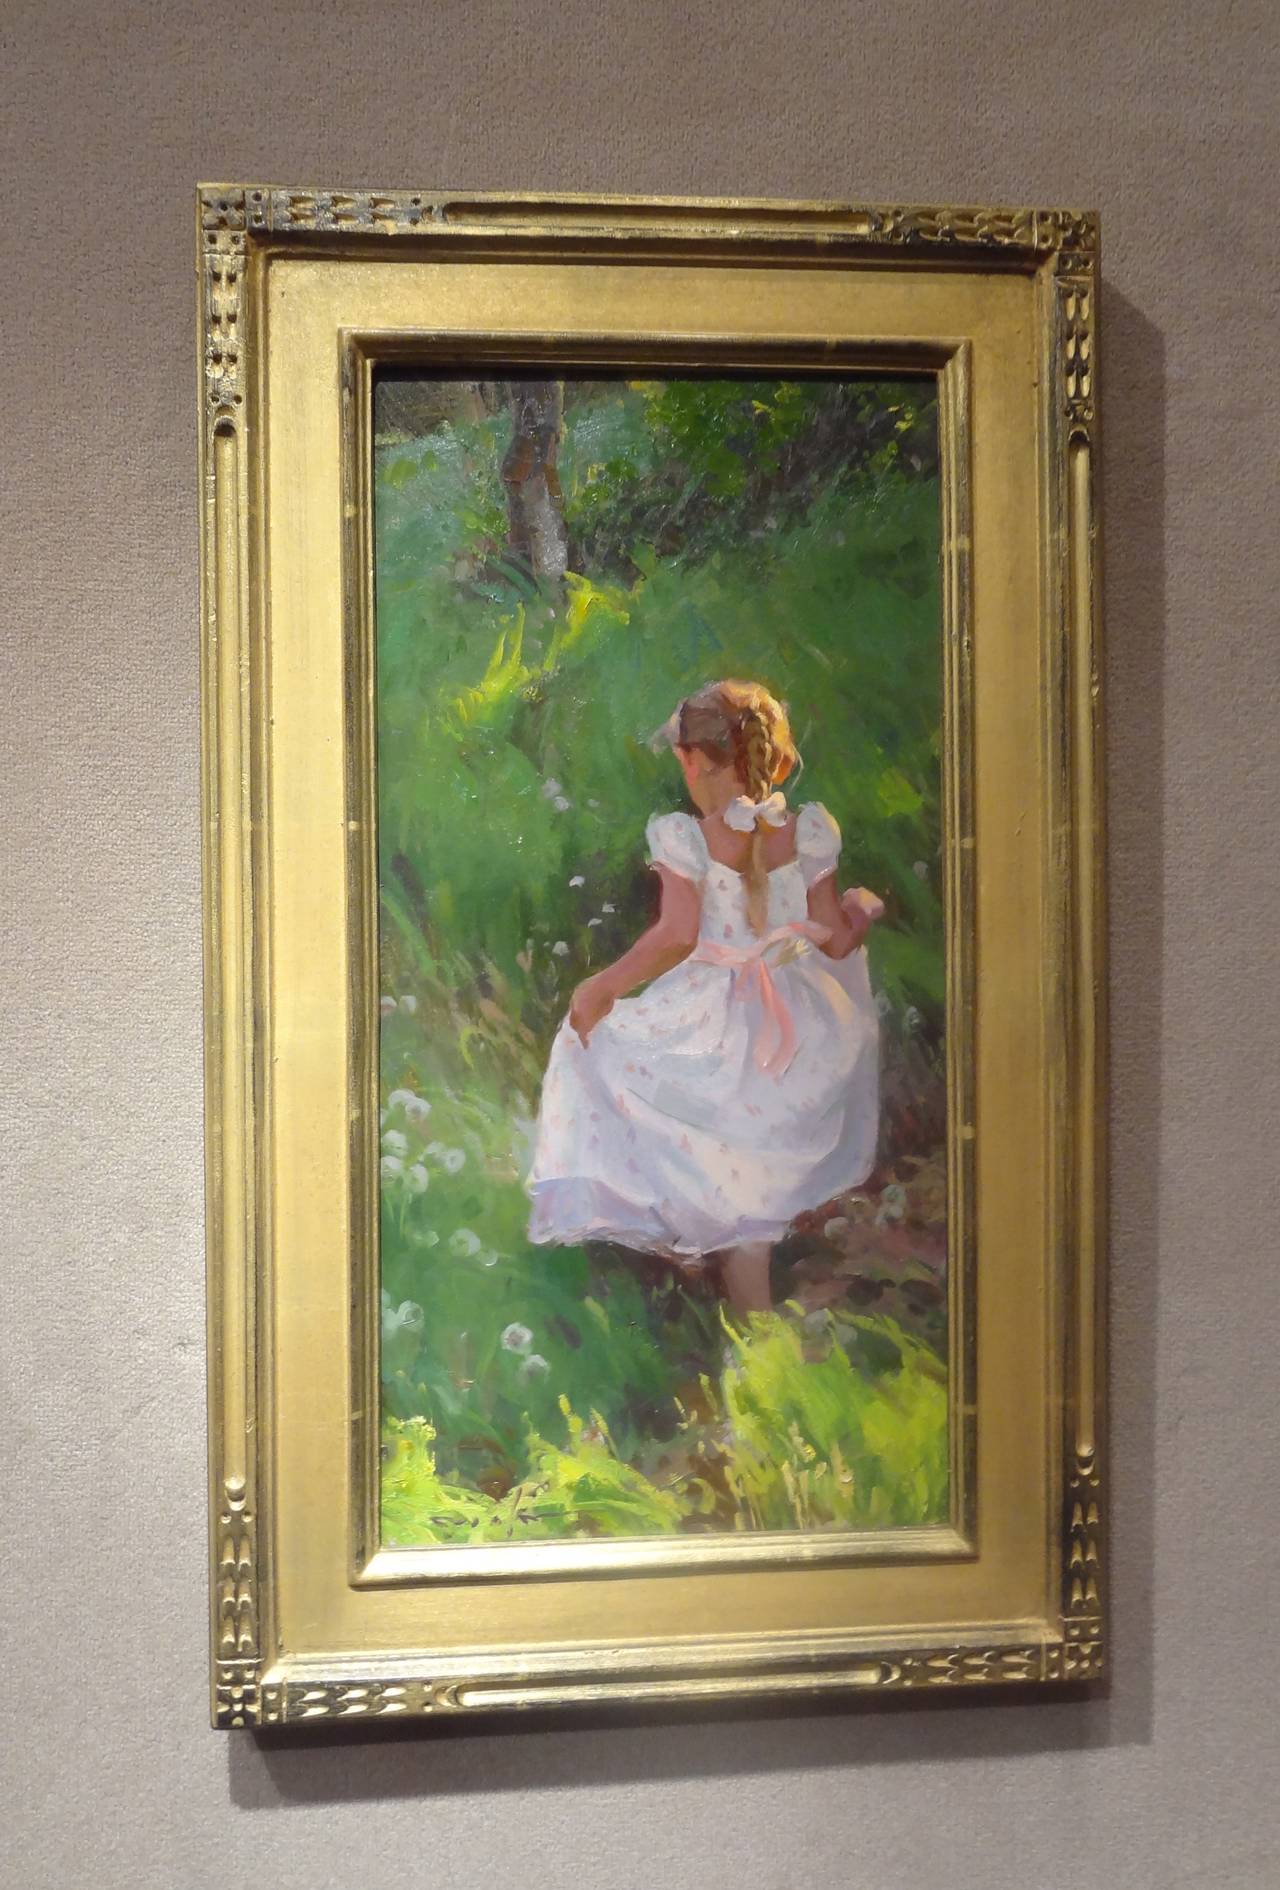 Playful Wonder - Painting by Michael Malm